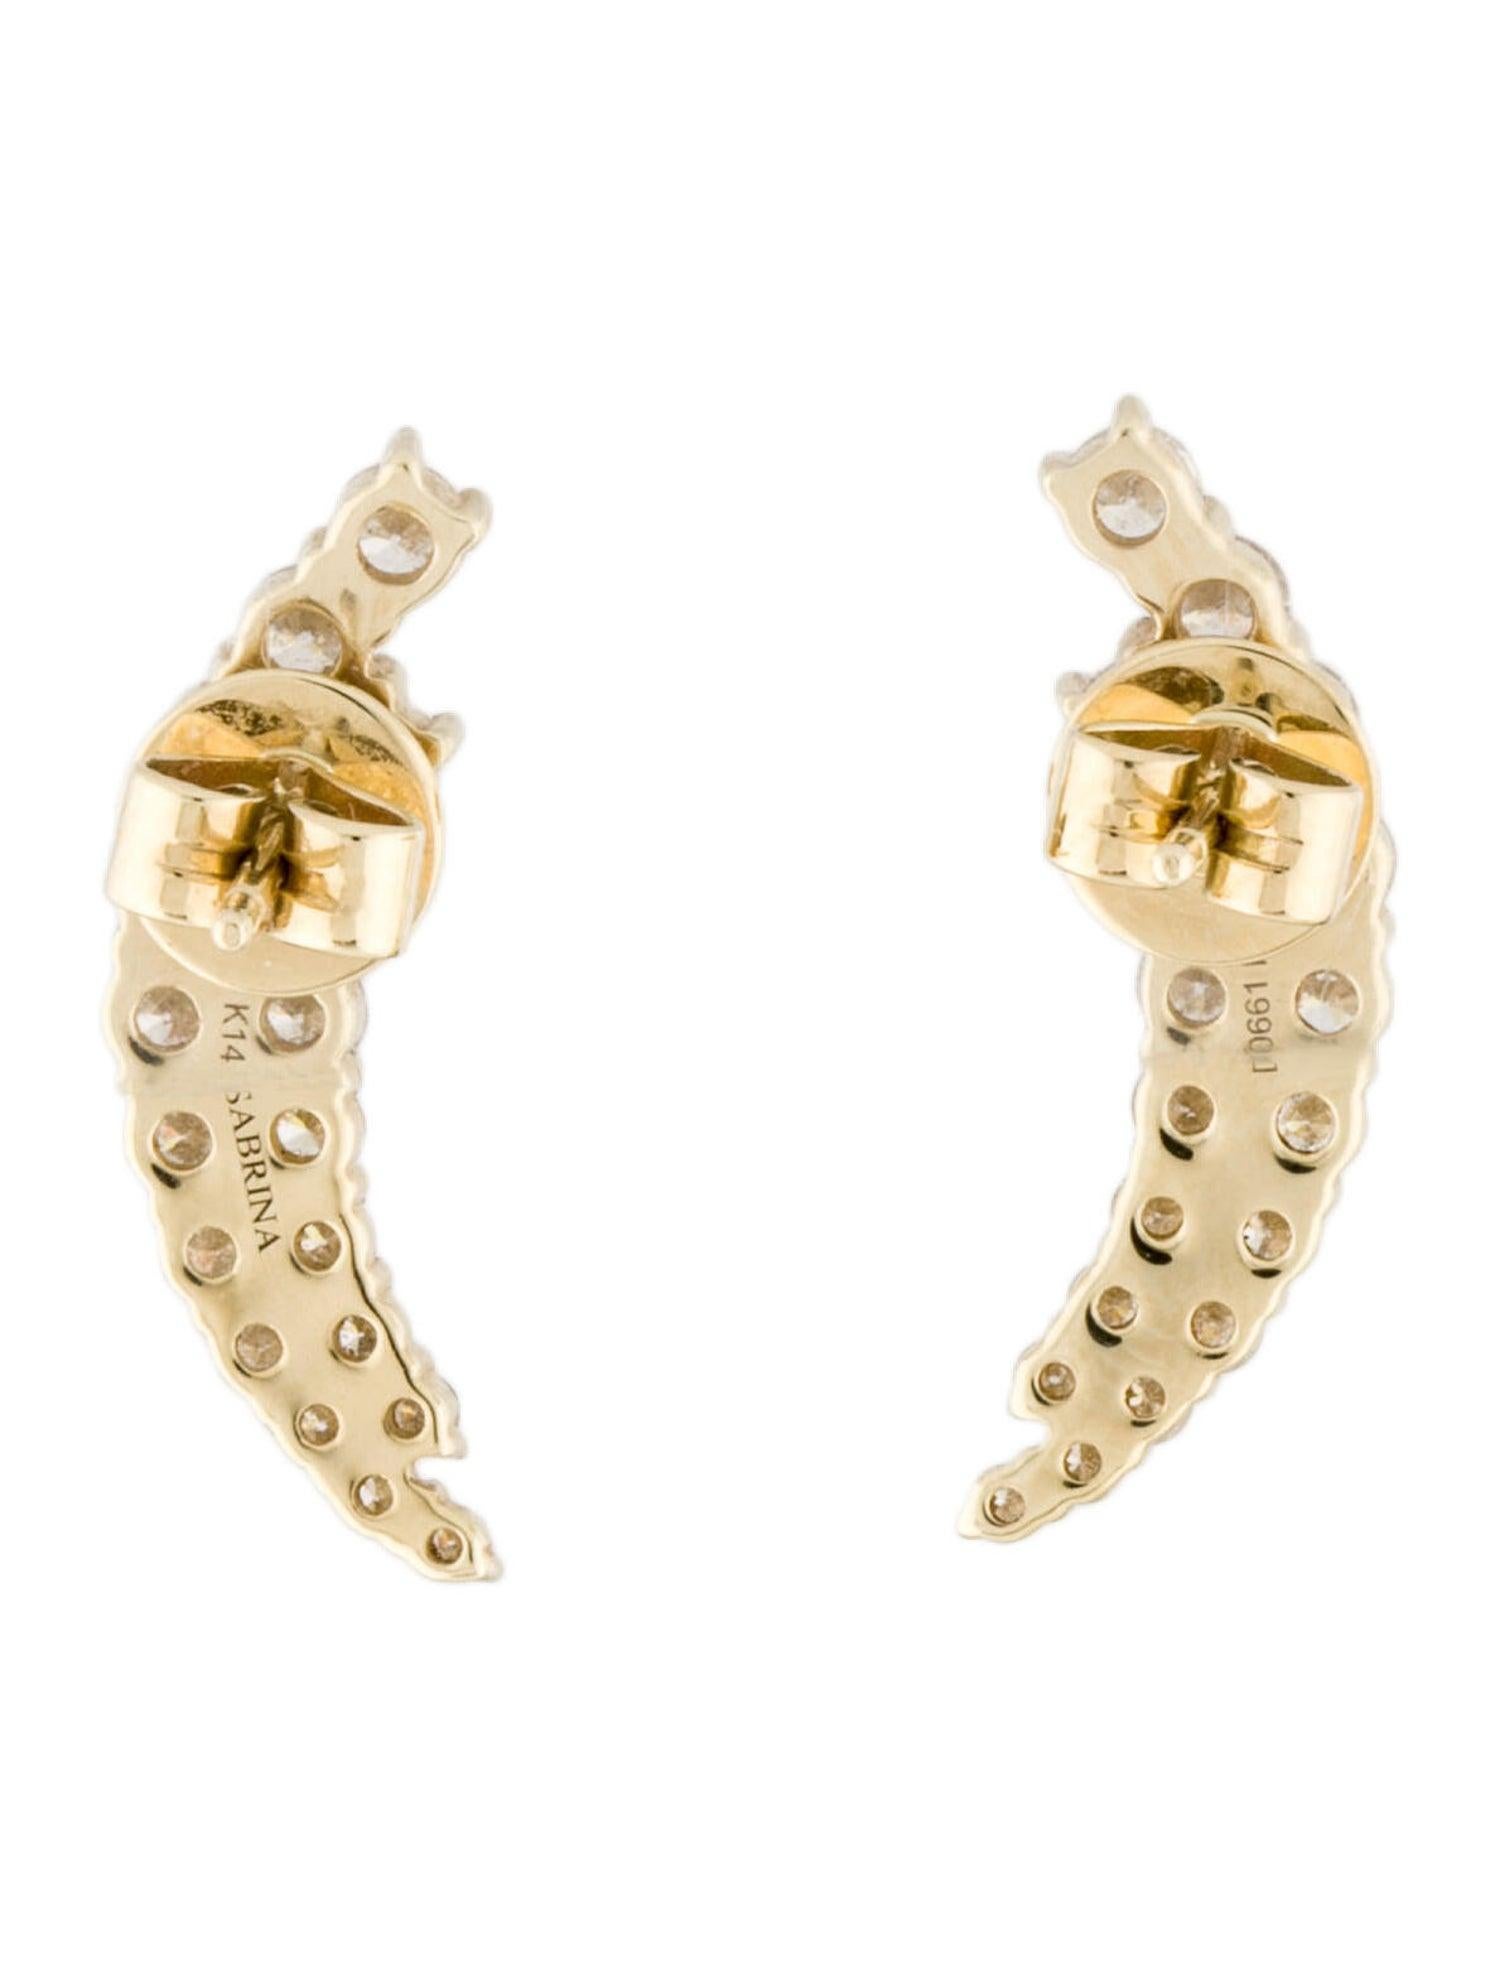 Wow to these Elegant and Stylish Gorgeous Ear Climber Diamond Earrings which will make heads turn! Crafted of 14K Gold featuring approximately 1.31 ct. of natural White Diamonds GH-SI Color & Clarity. Available in the options of White, Rose & Yellow